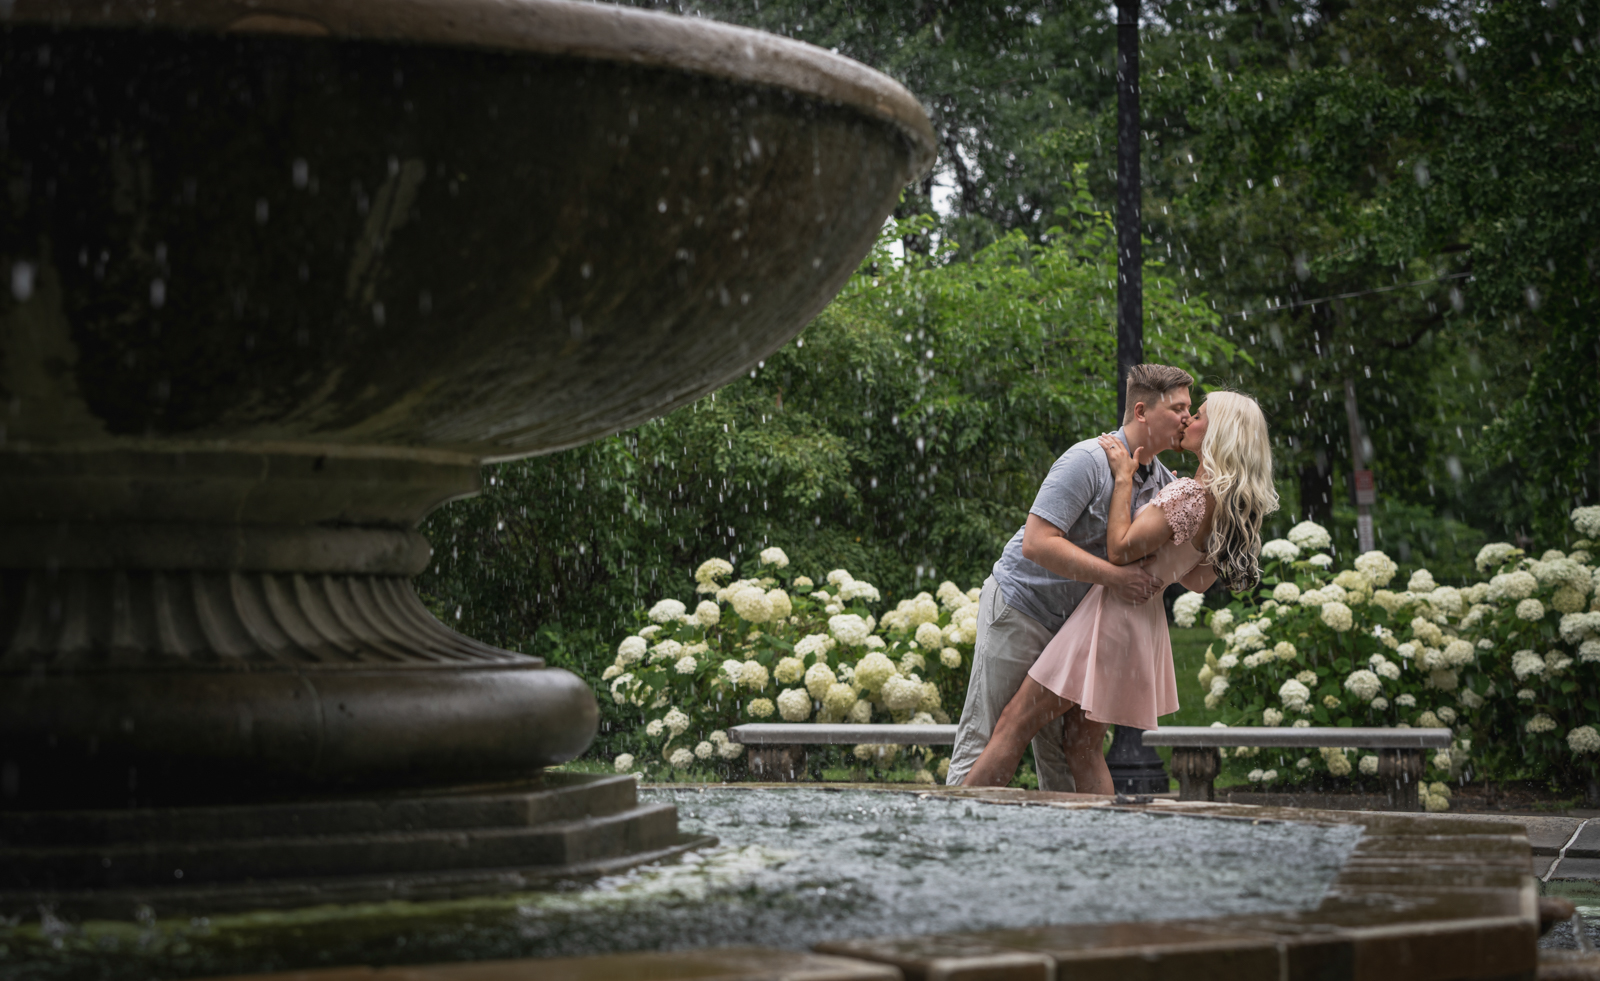 Capturing Love in Bloom: Nicole and Noah’s Enchanting Engagement Session at Rockefeller Greenhouse and Cultural Gardens in Cleveland, Ohio